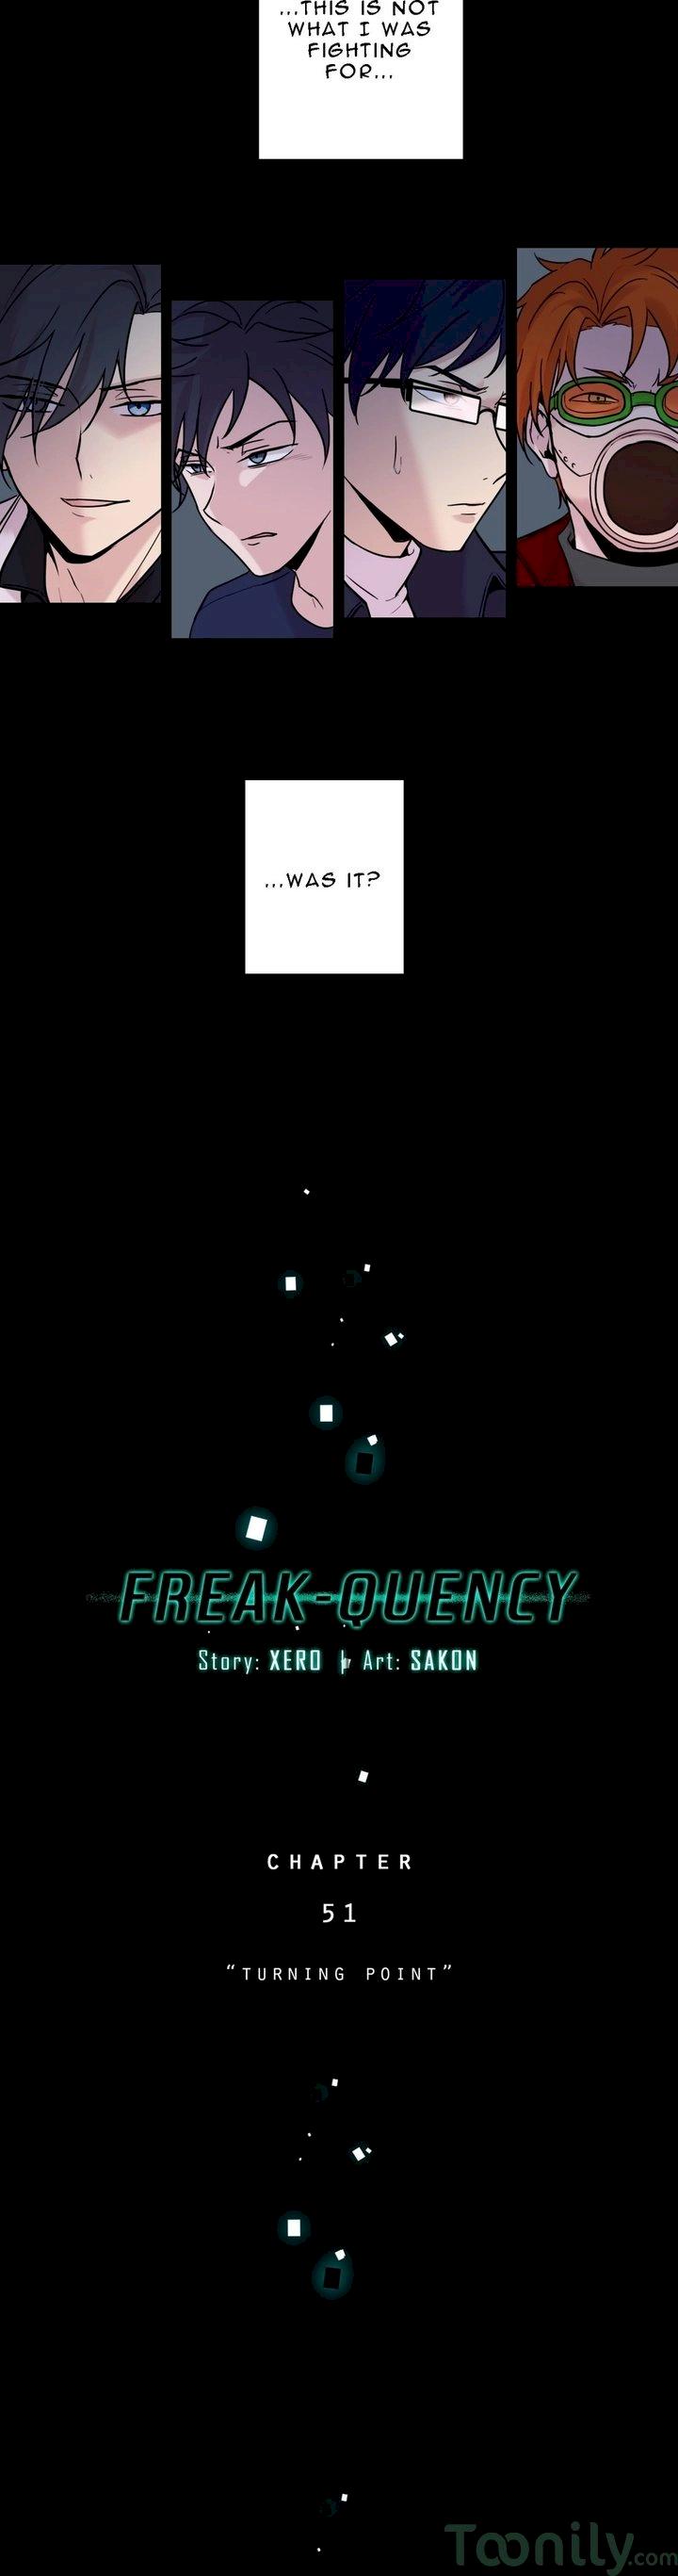 Freak-Quency - Chapter 51 Page 6